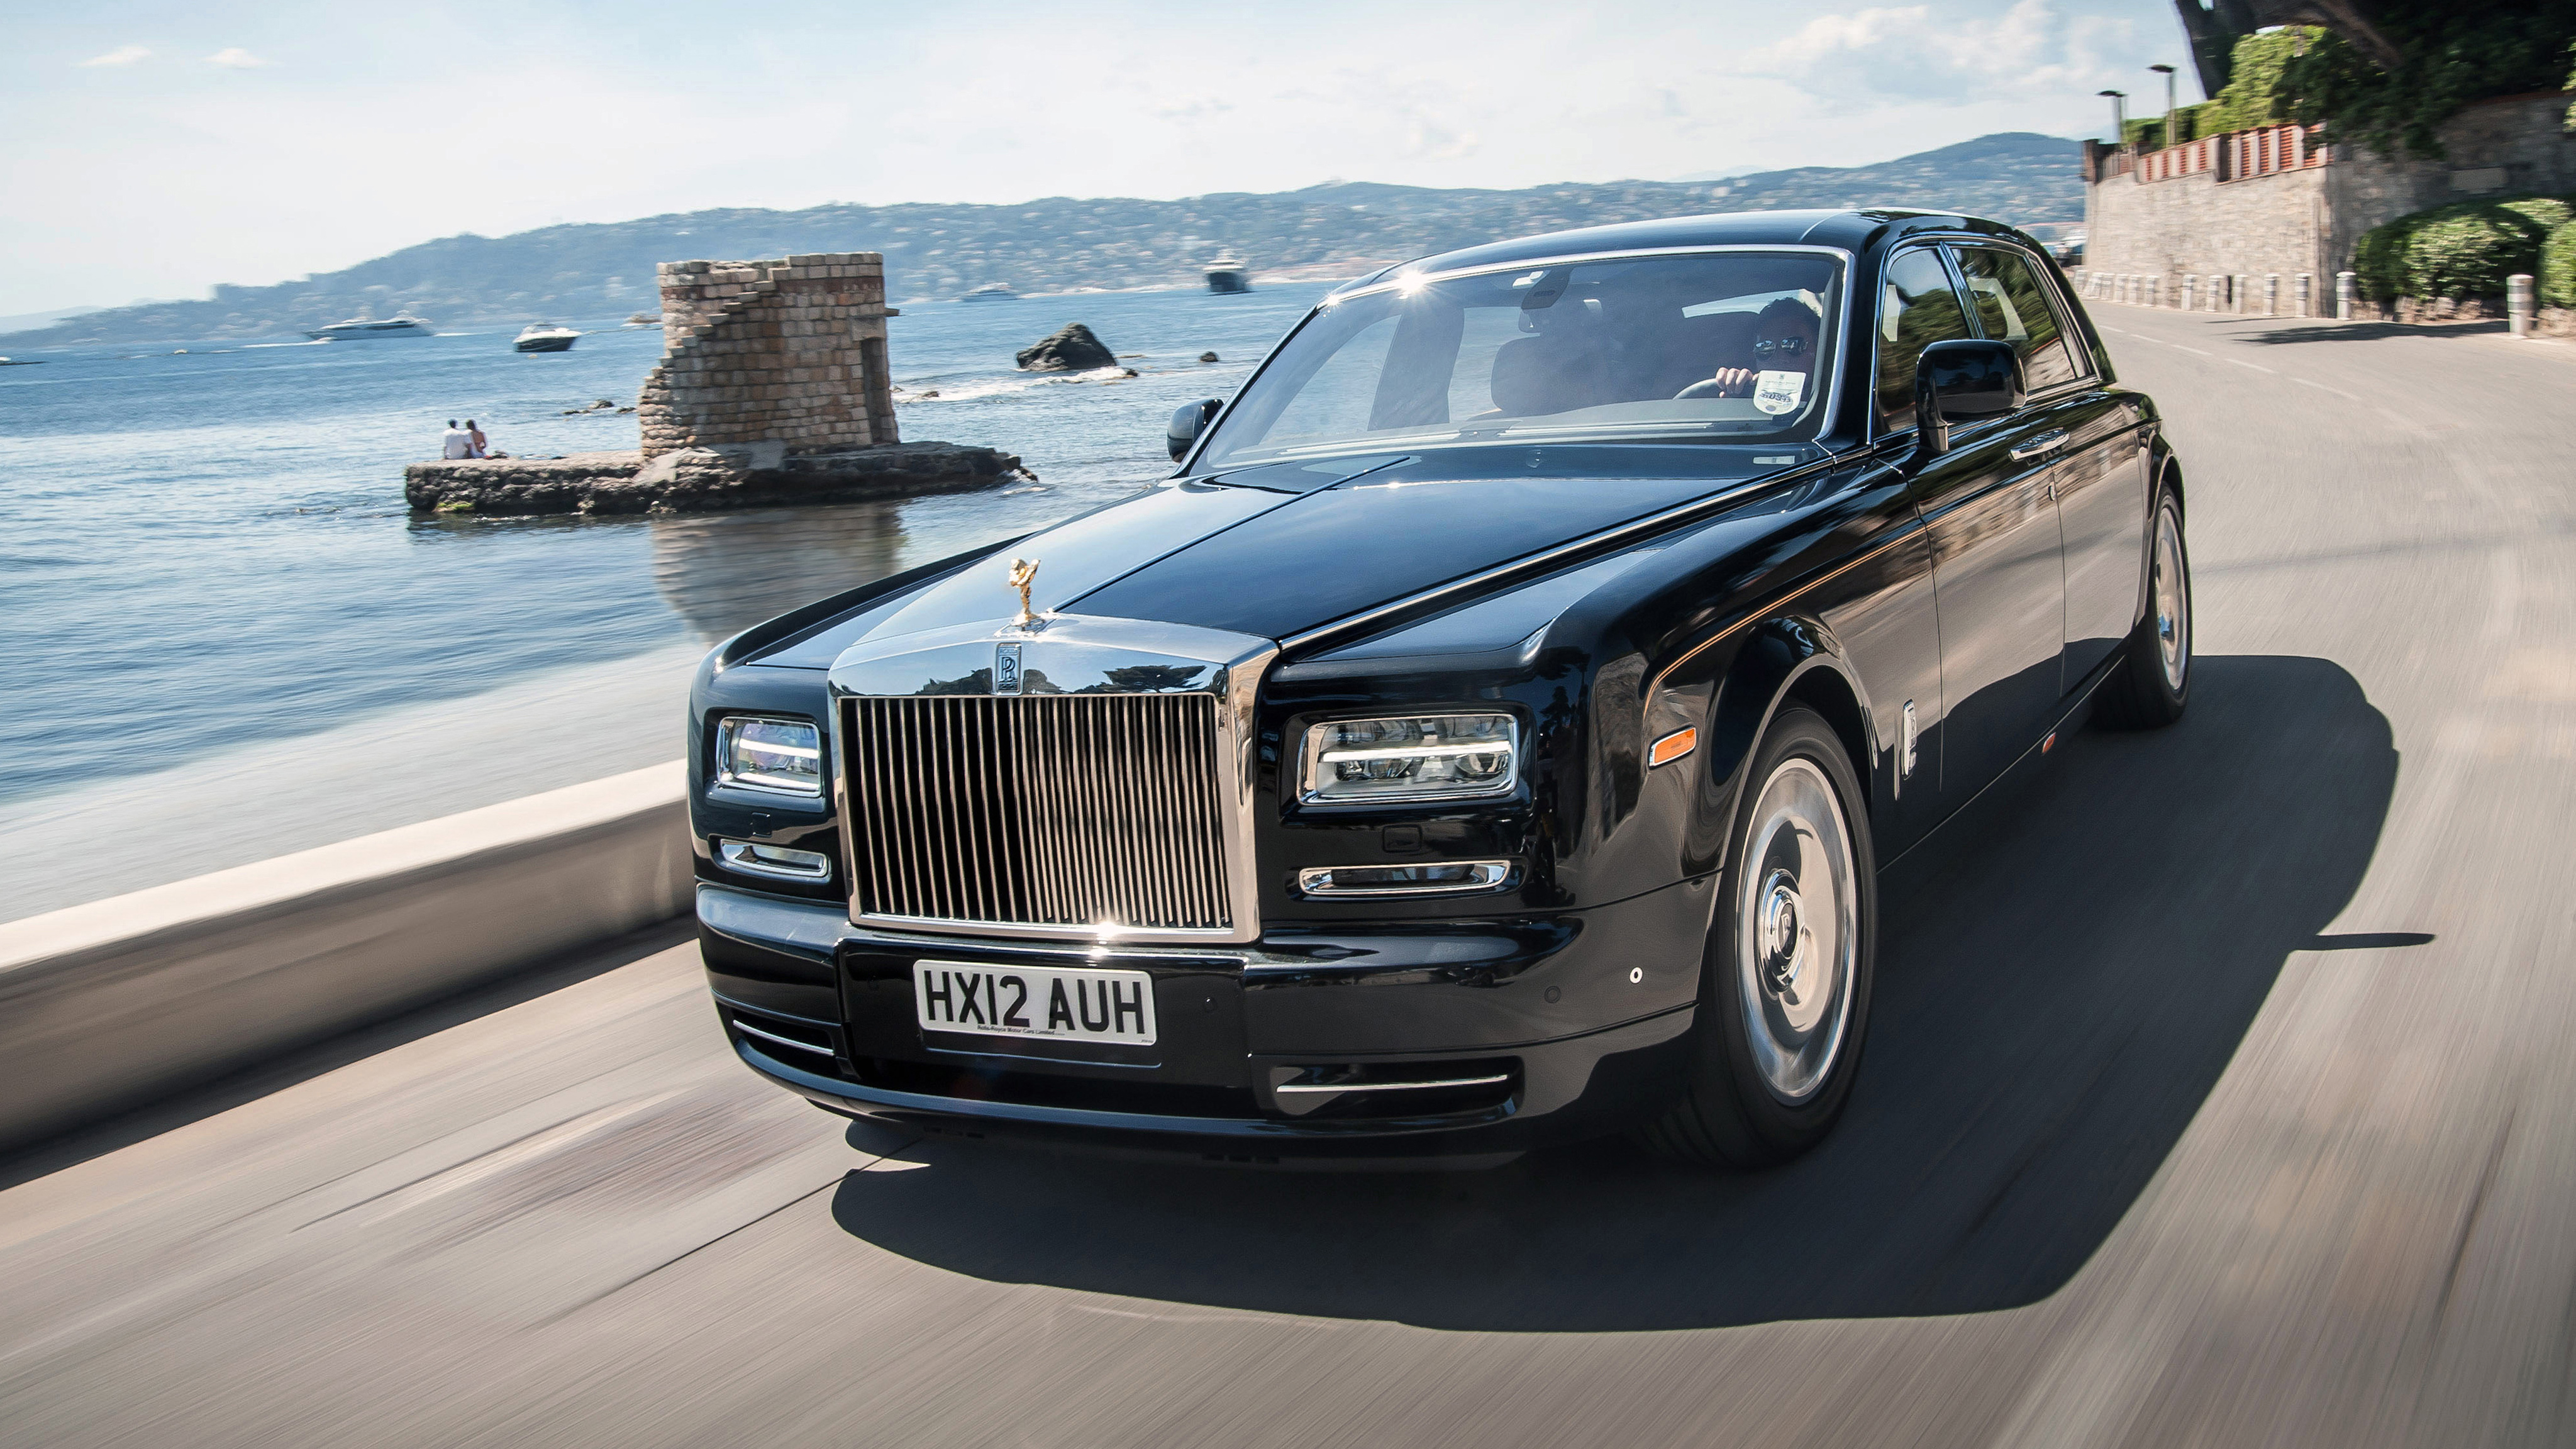 General 4096x2304 car Rolls-Royce luxury cars British cars frontal view licence plates water road sunlight vehicle driving